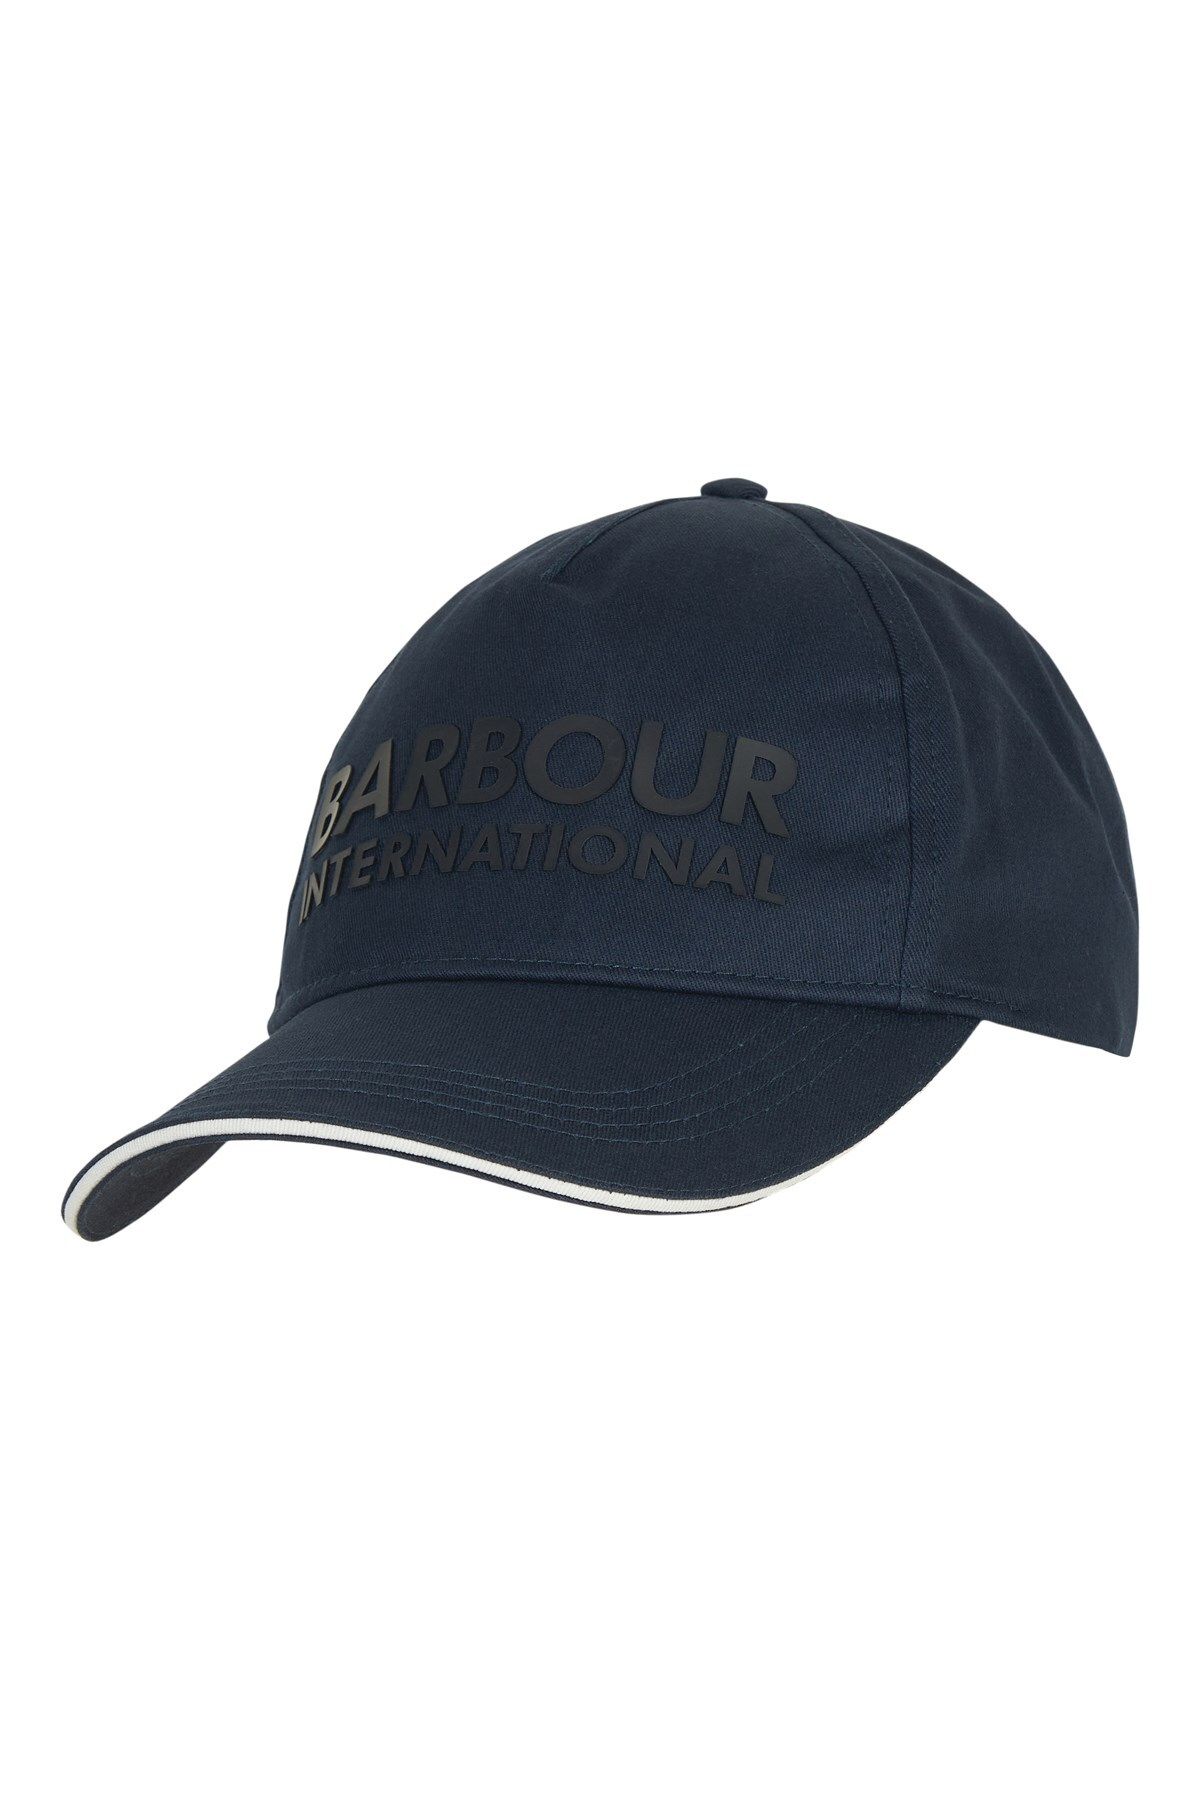 Barbour B.intl ampere Sports Cap NY51 Navy